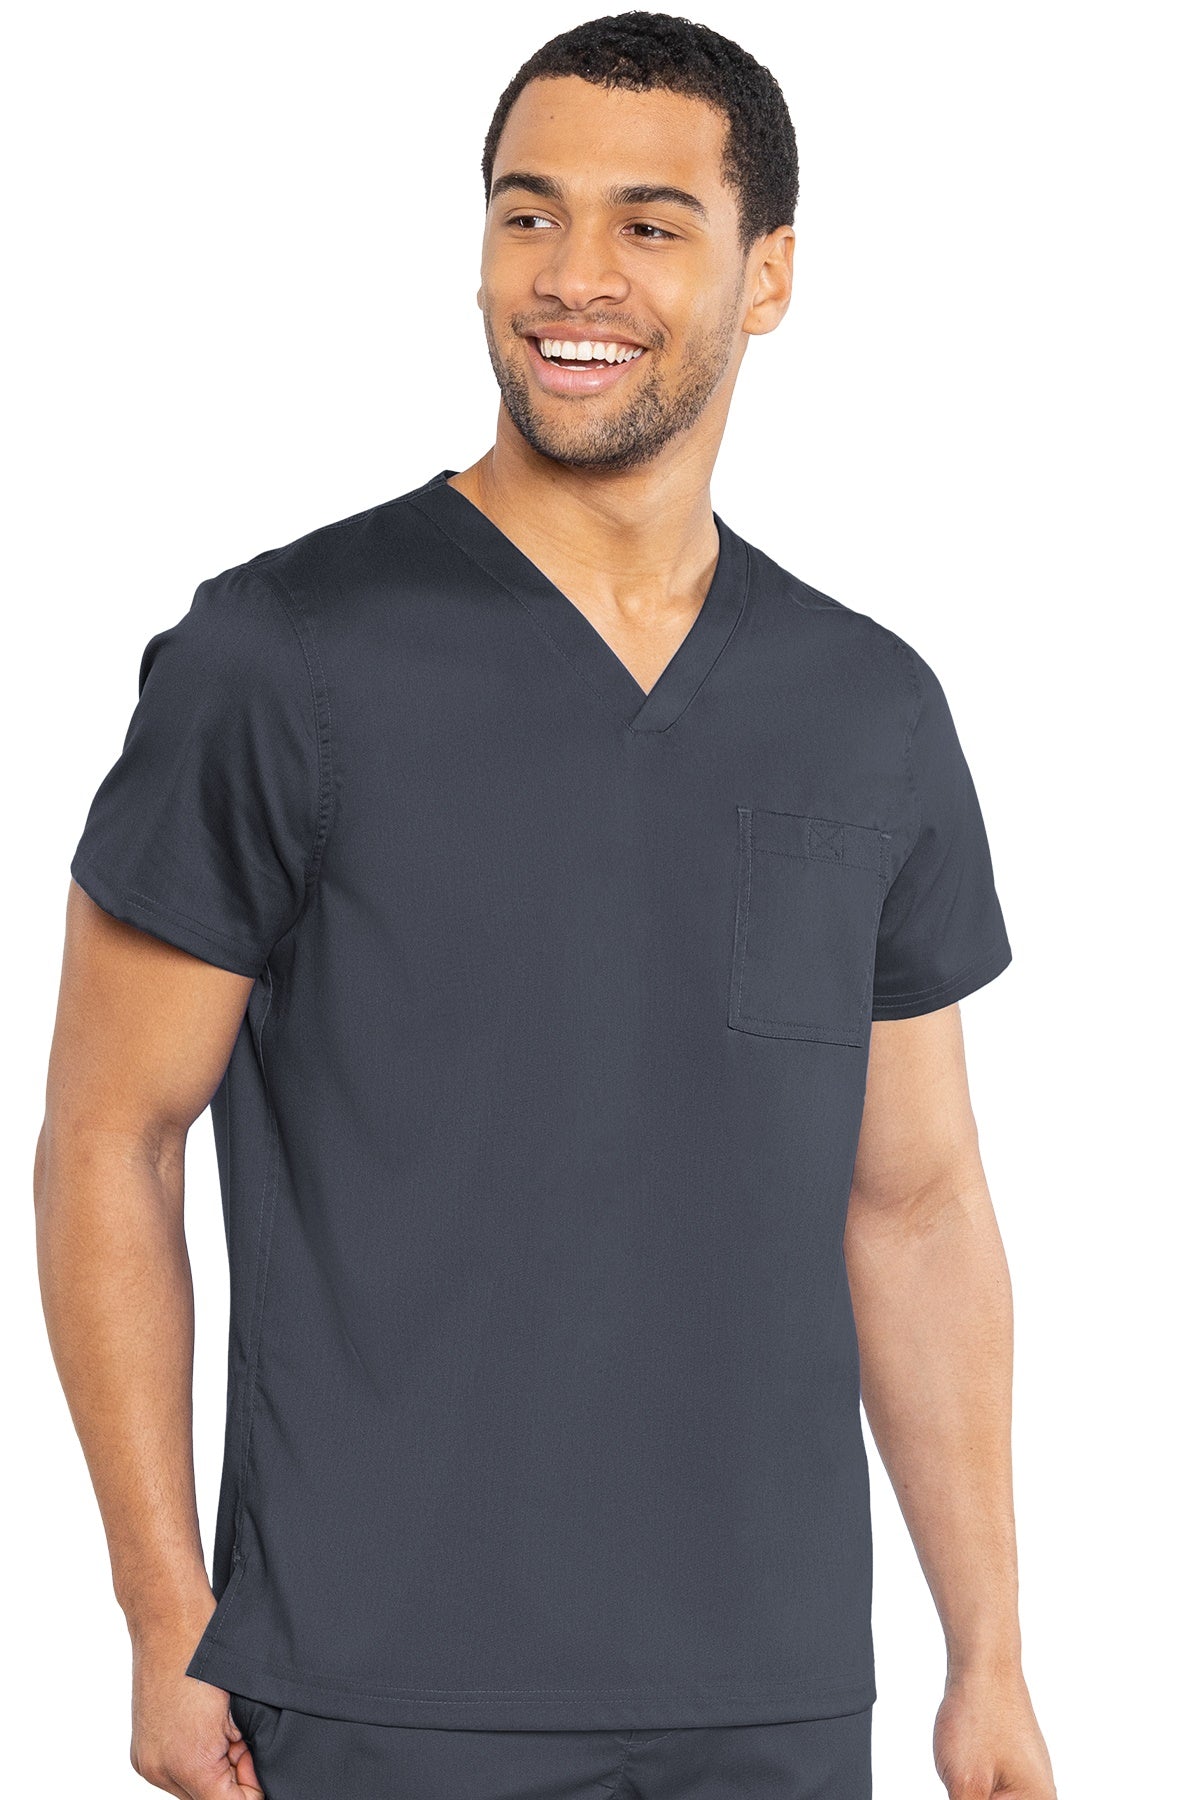 Med Couture Mens Scrub Top RothWear Cadence in Pewter at Parker's Clothing and Shoes.